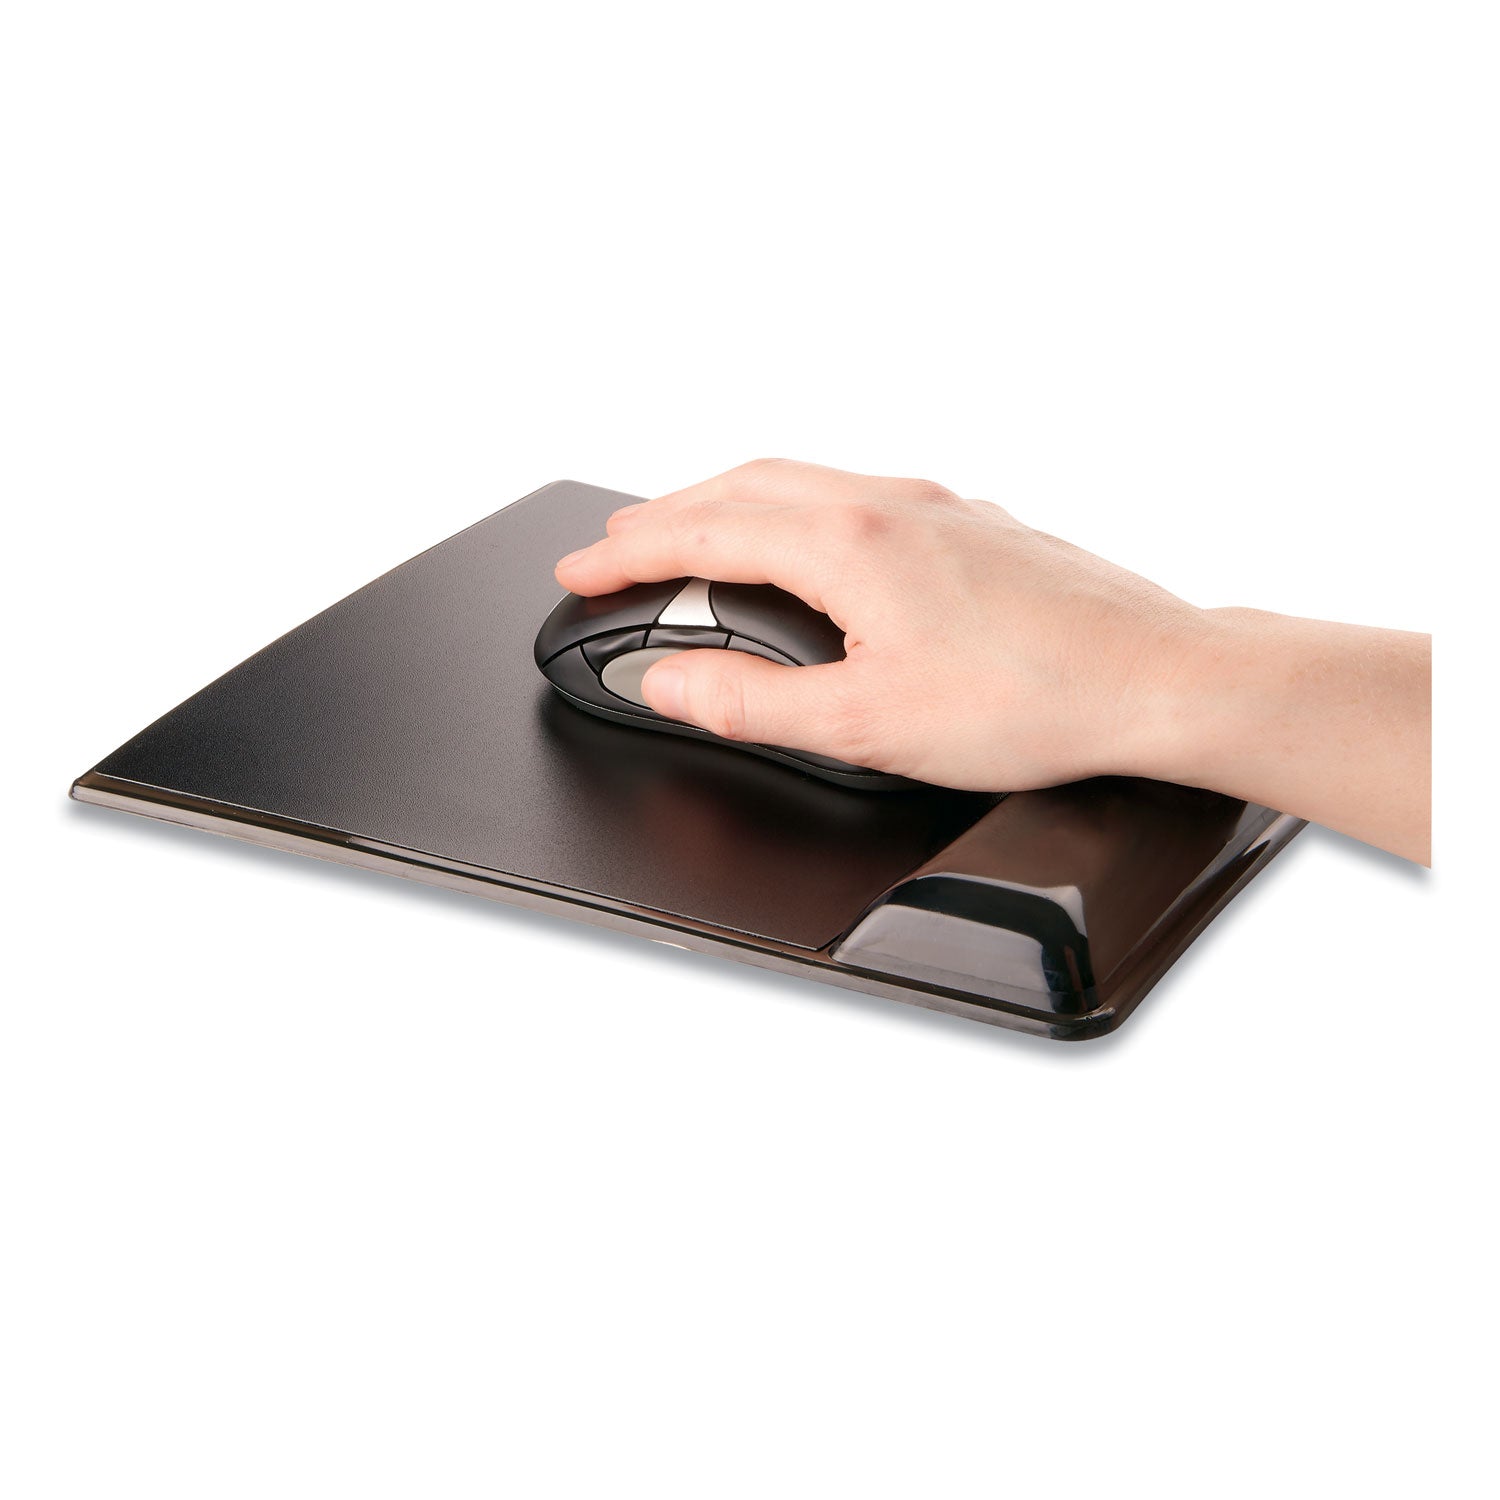 Gel Wrist Support with Attached Mouse Pad, 8.25 x 9.87, Black - 